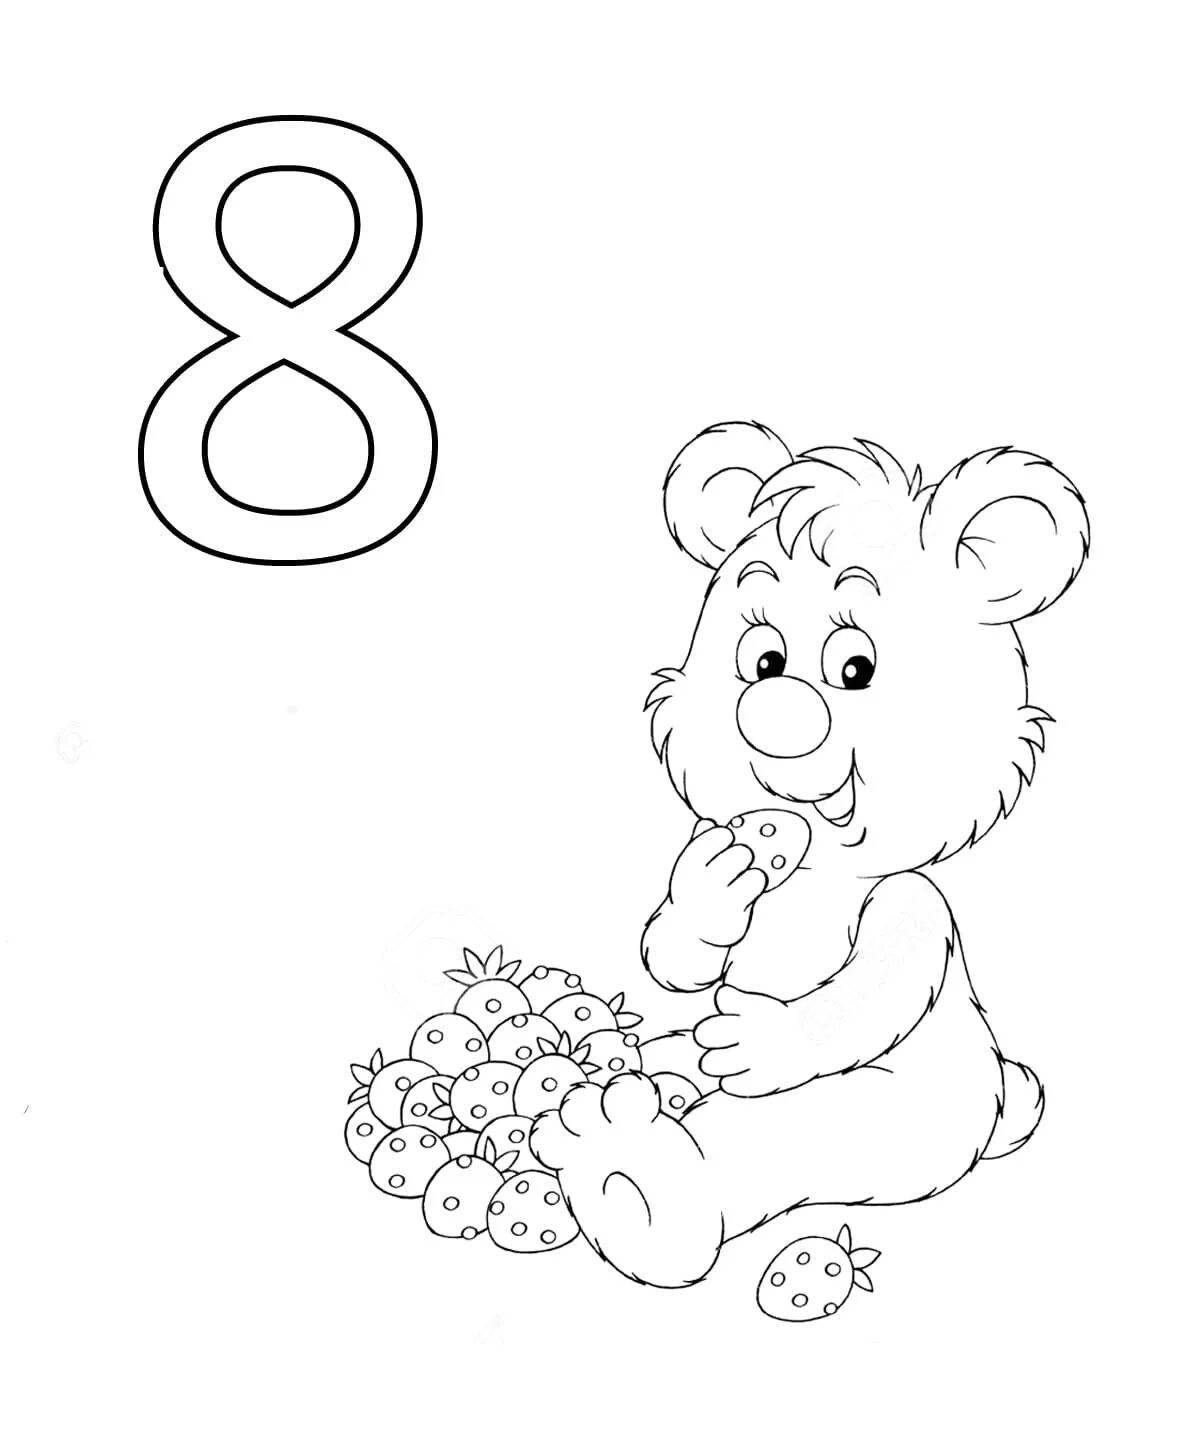 The Incredible Figure Eight Coloring Page